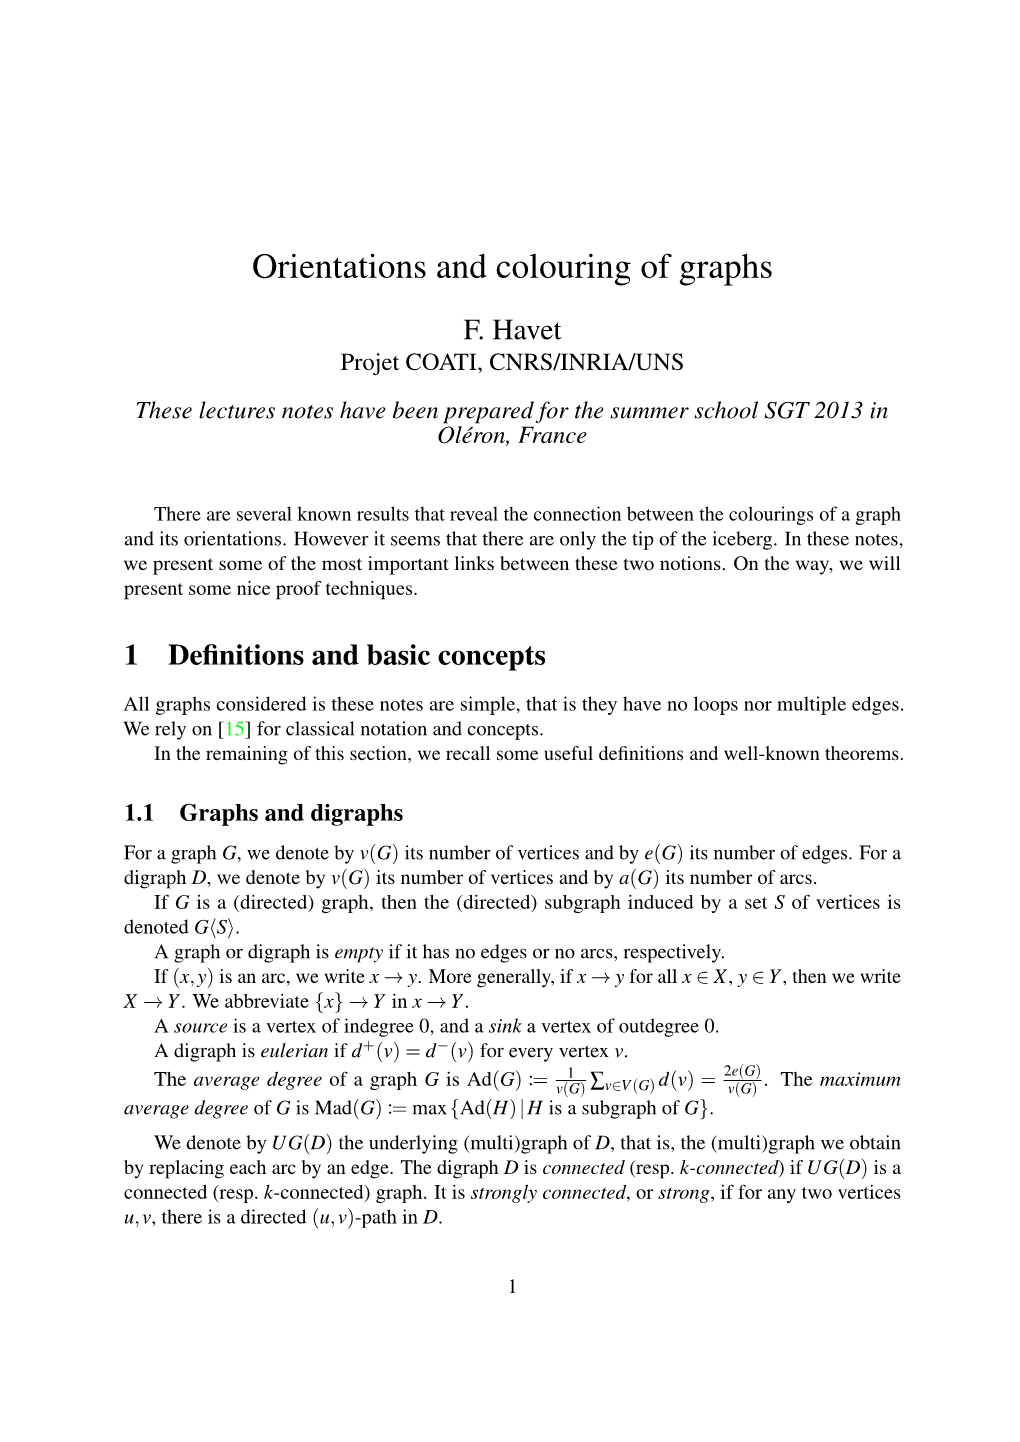 Orientations and Colouring of Graphs